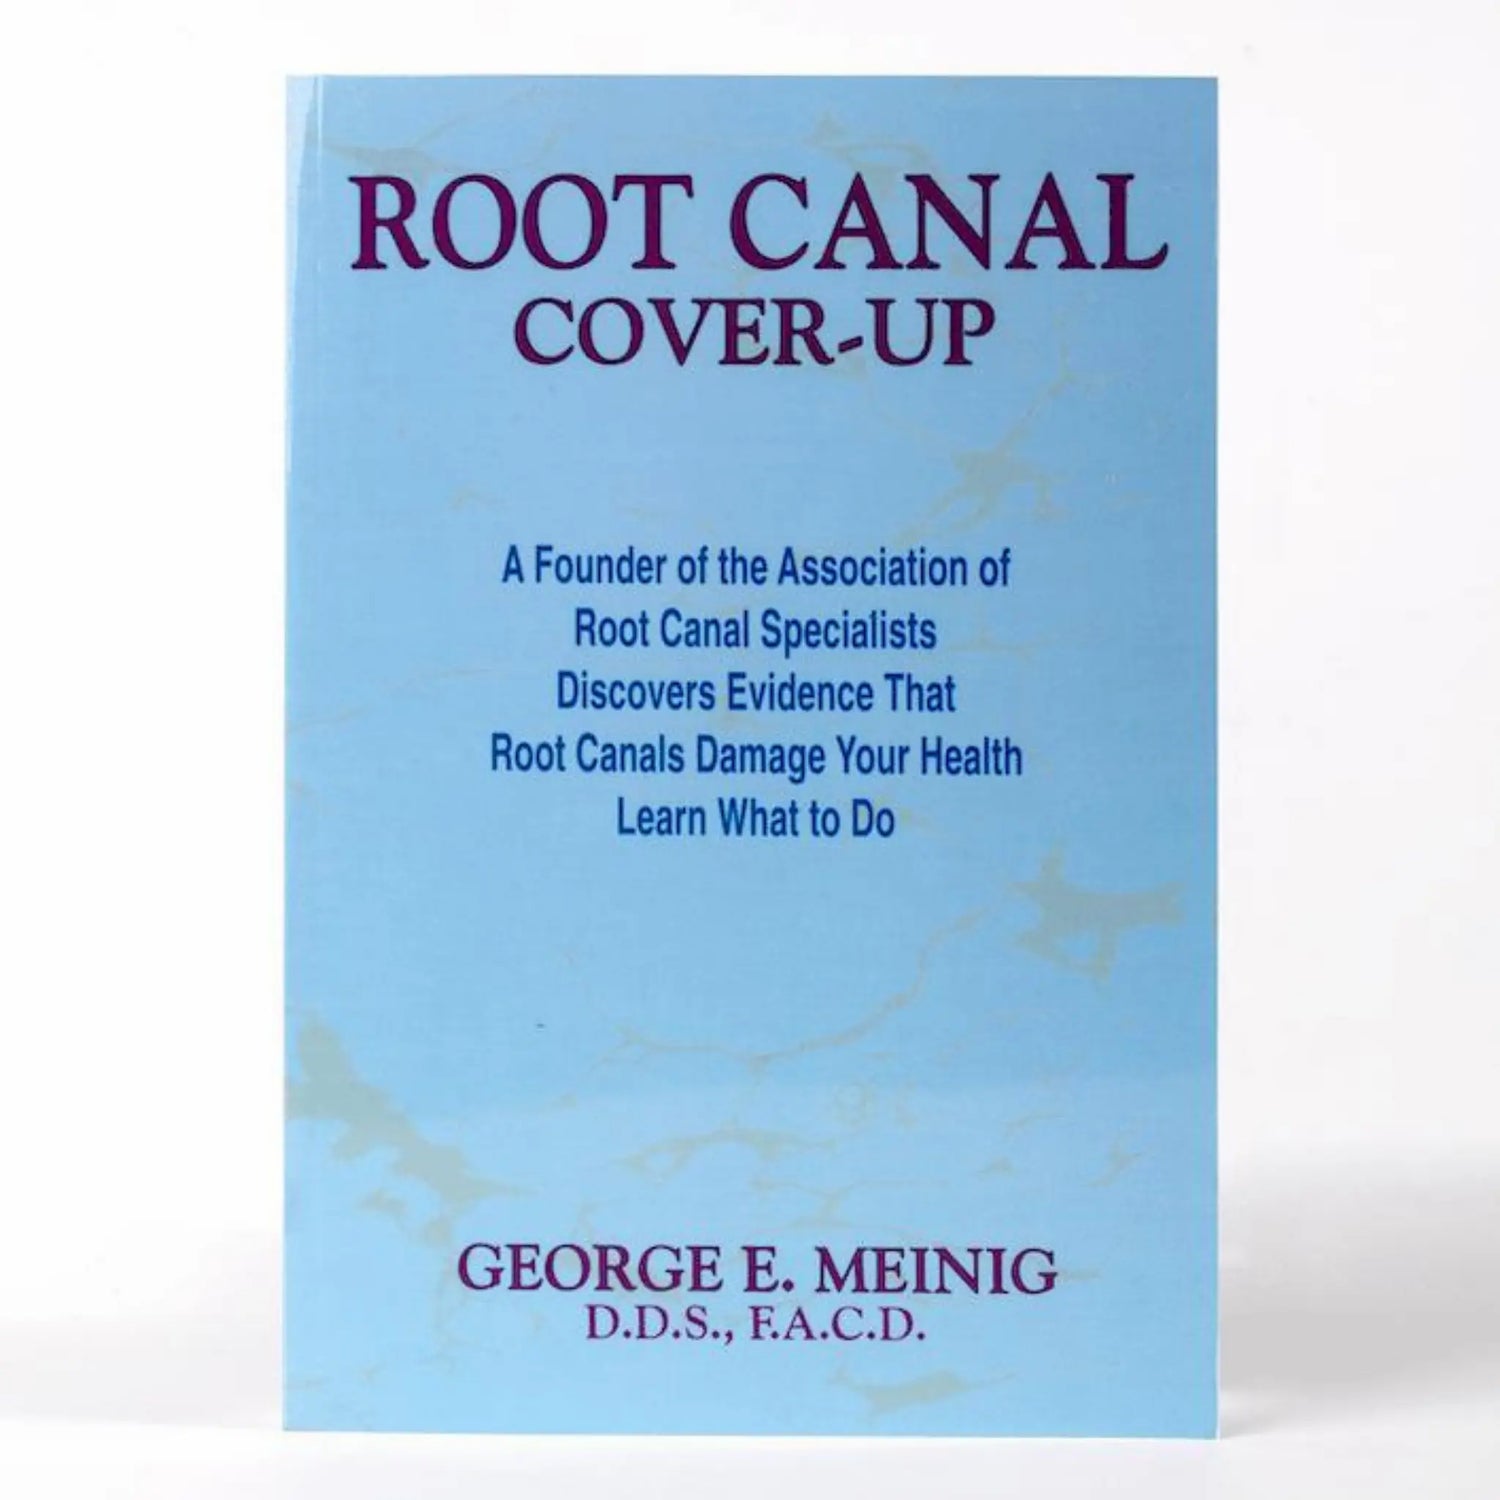 Root Canal Cover-Up